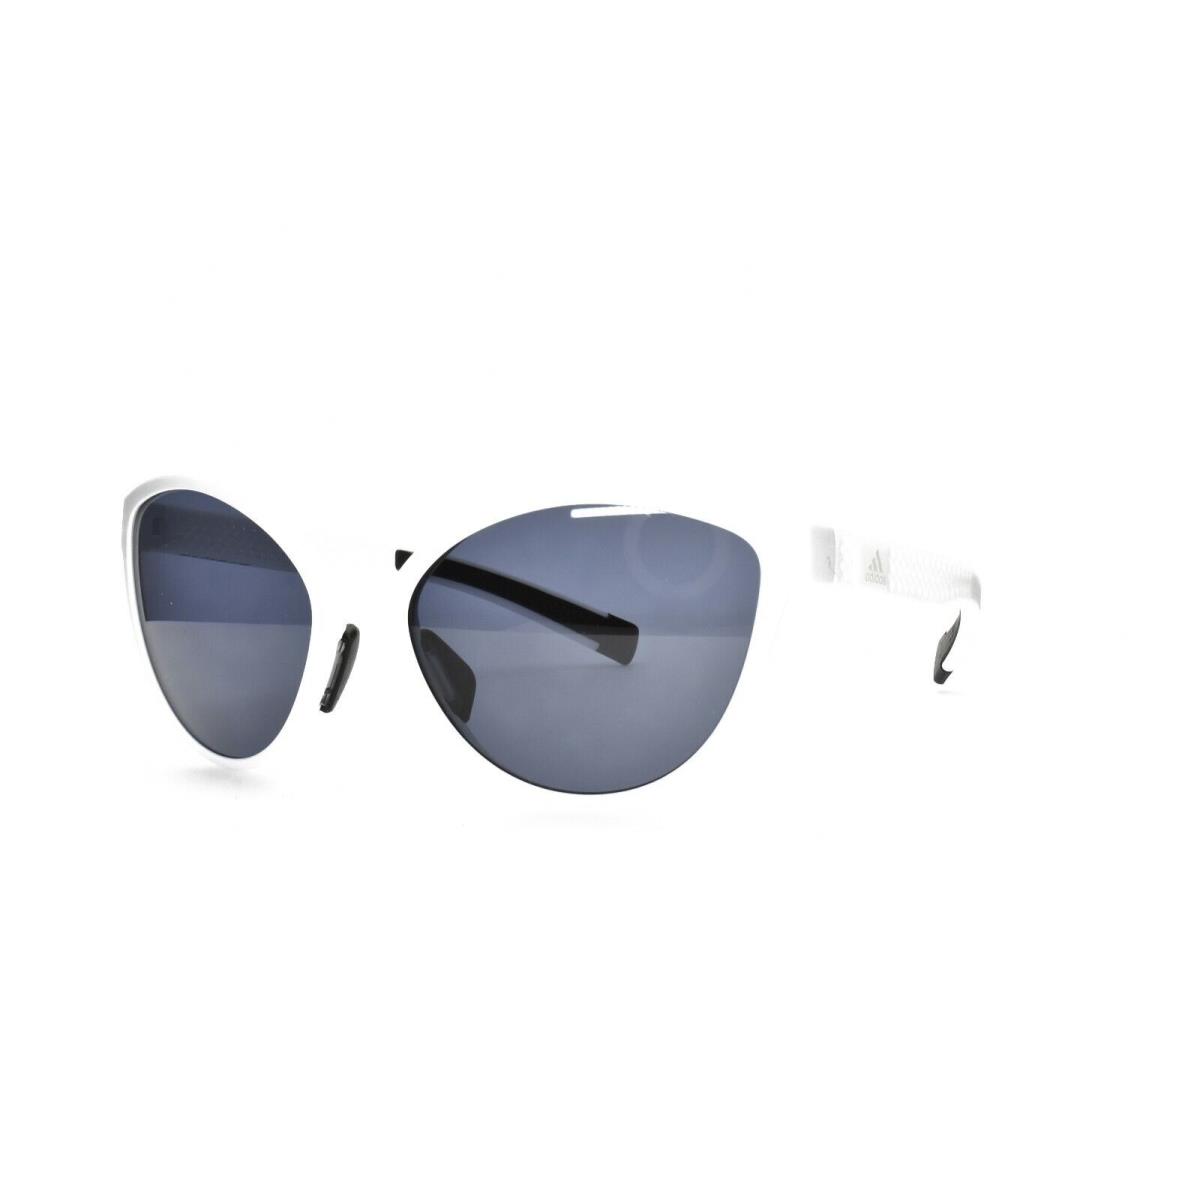 Adidas Sunglasses by Silhouette 3D Print Frame Tempest 37 75 1500 56 X White